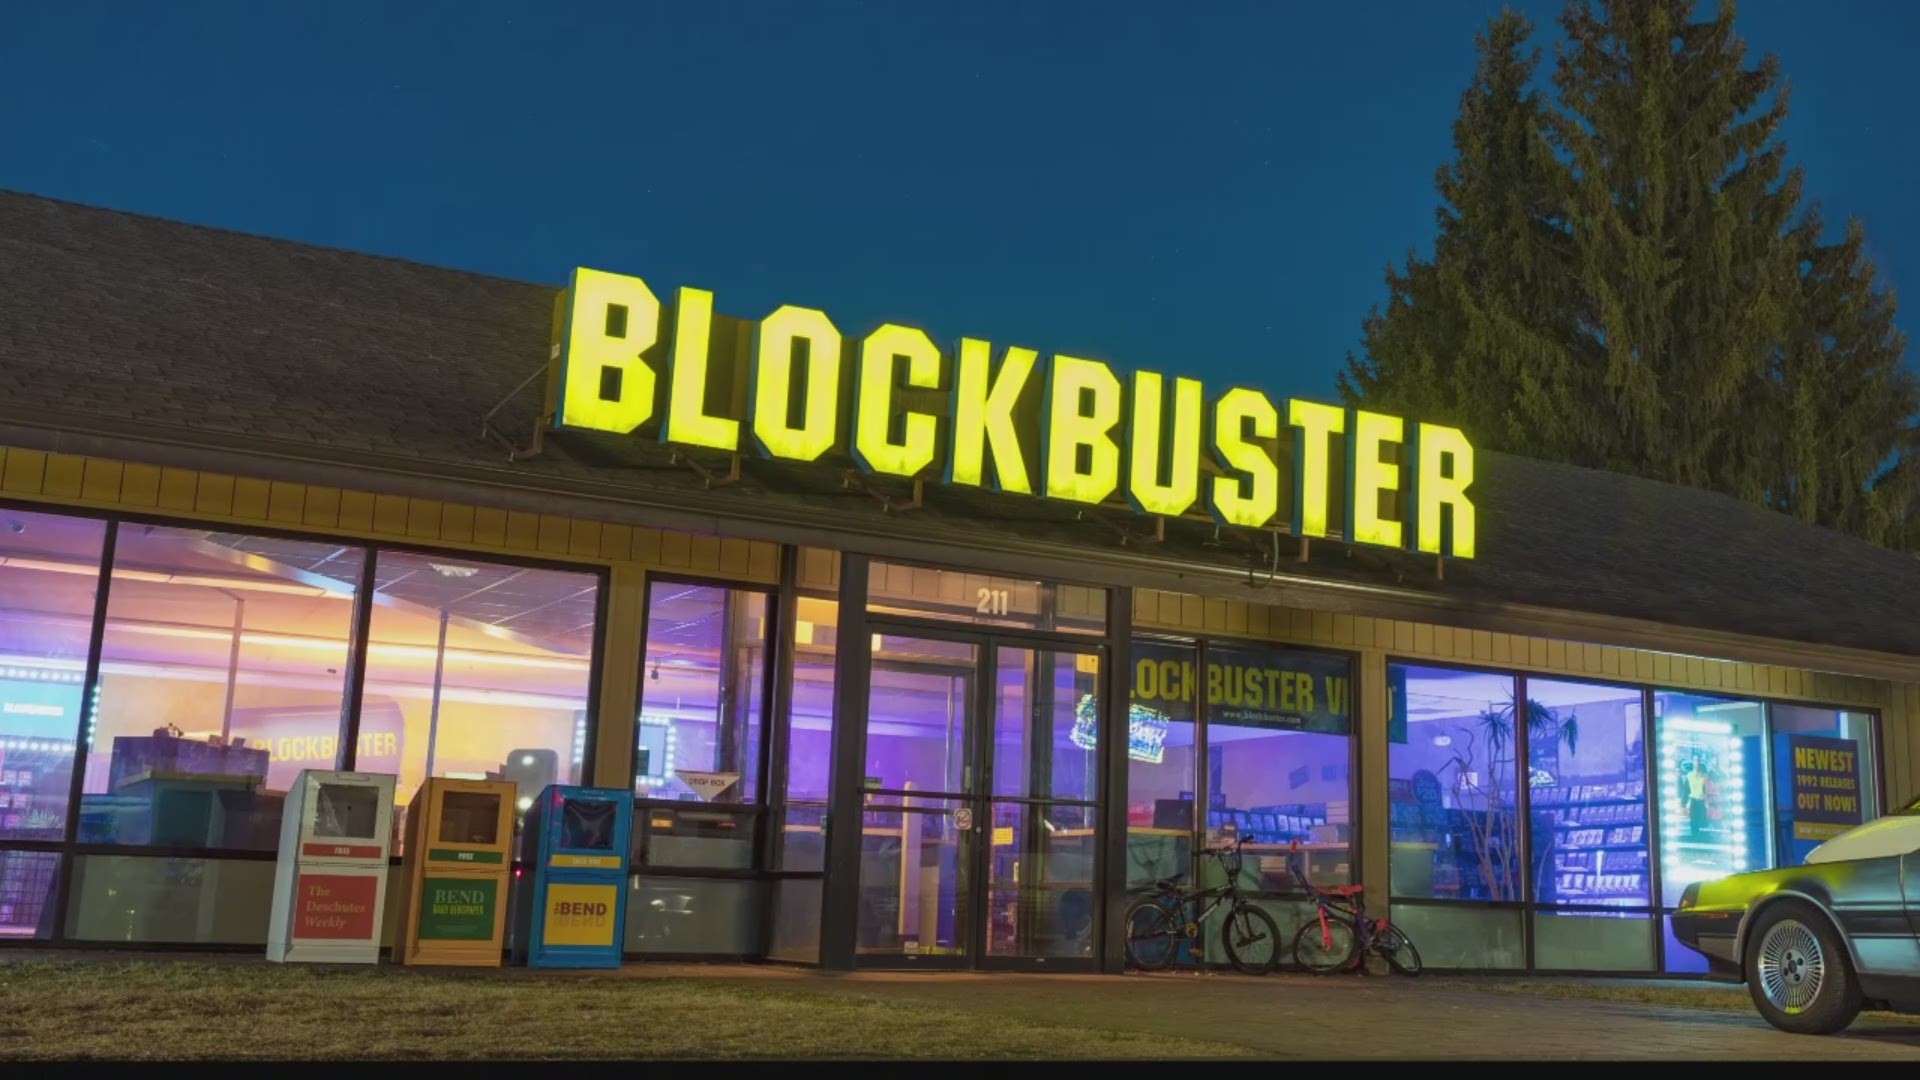 The last Blockbuster ever is in Bend, Oregon! And now Deschutes County residents can rent out the store for the nostalgic slumber part of your 90s dreams!